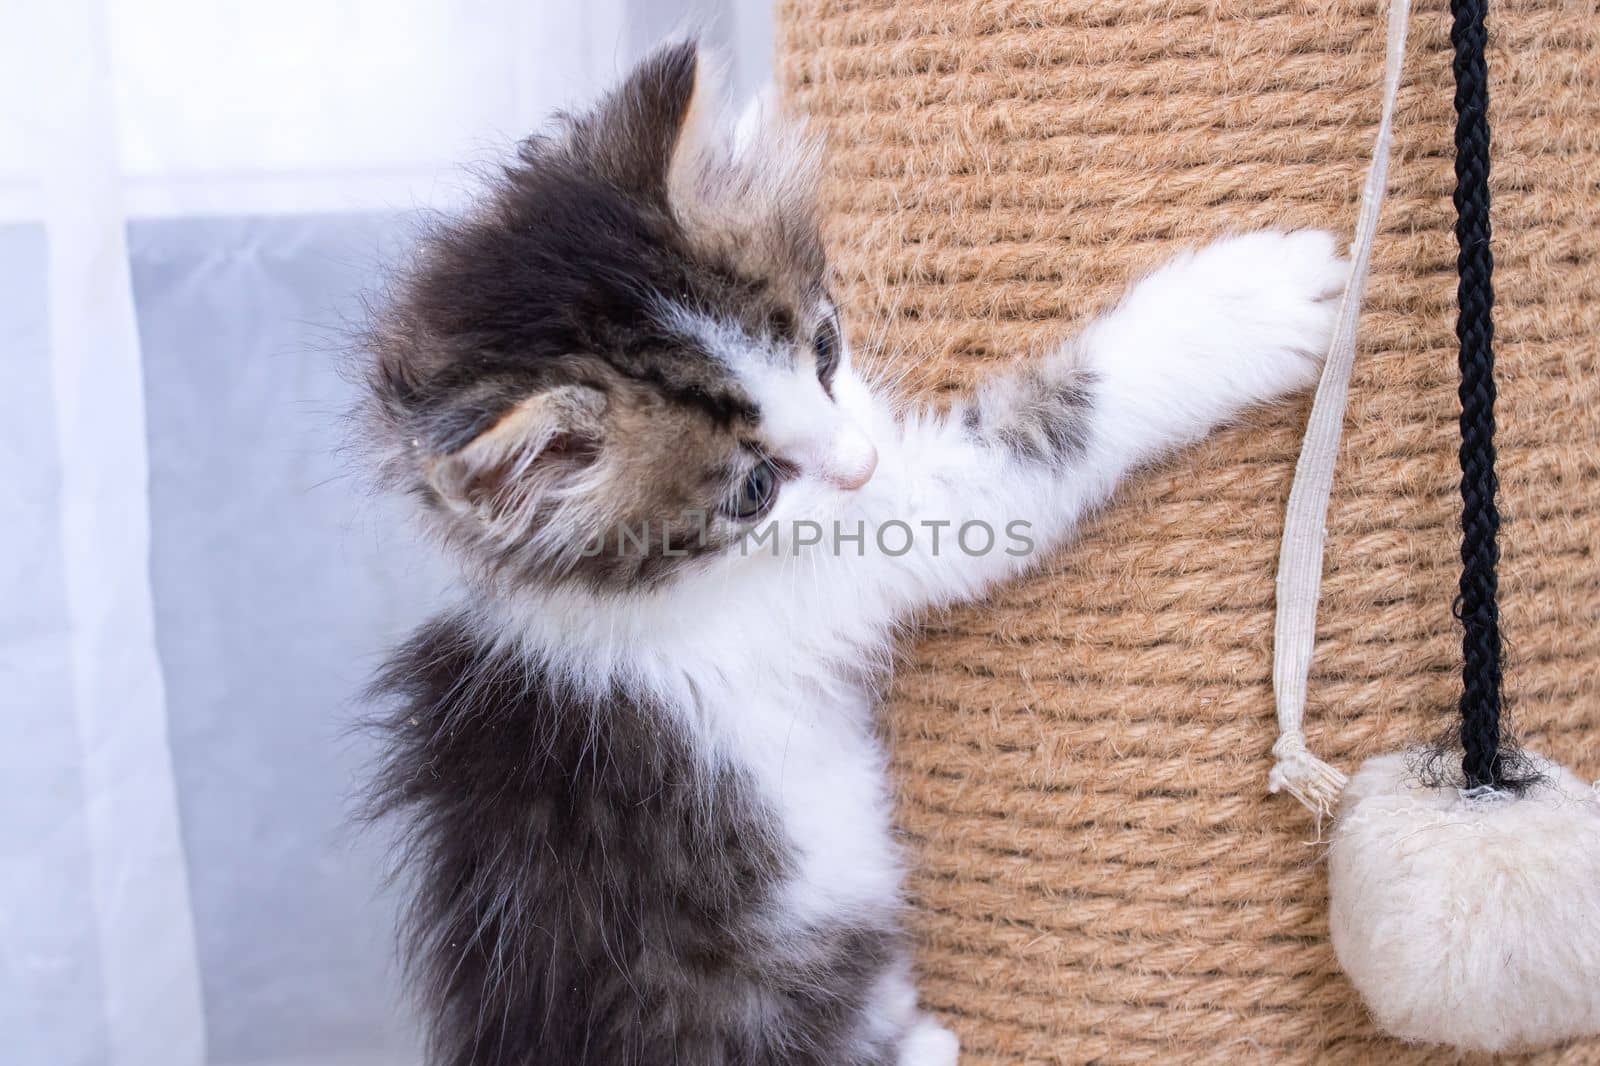 A little kitten plays with a scratching post by Vera1703